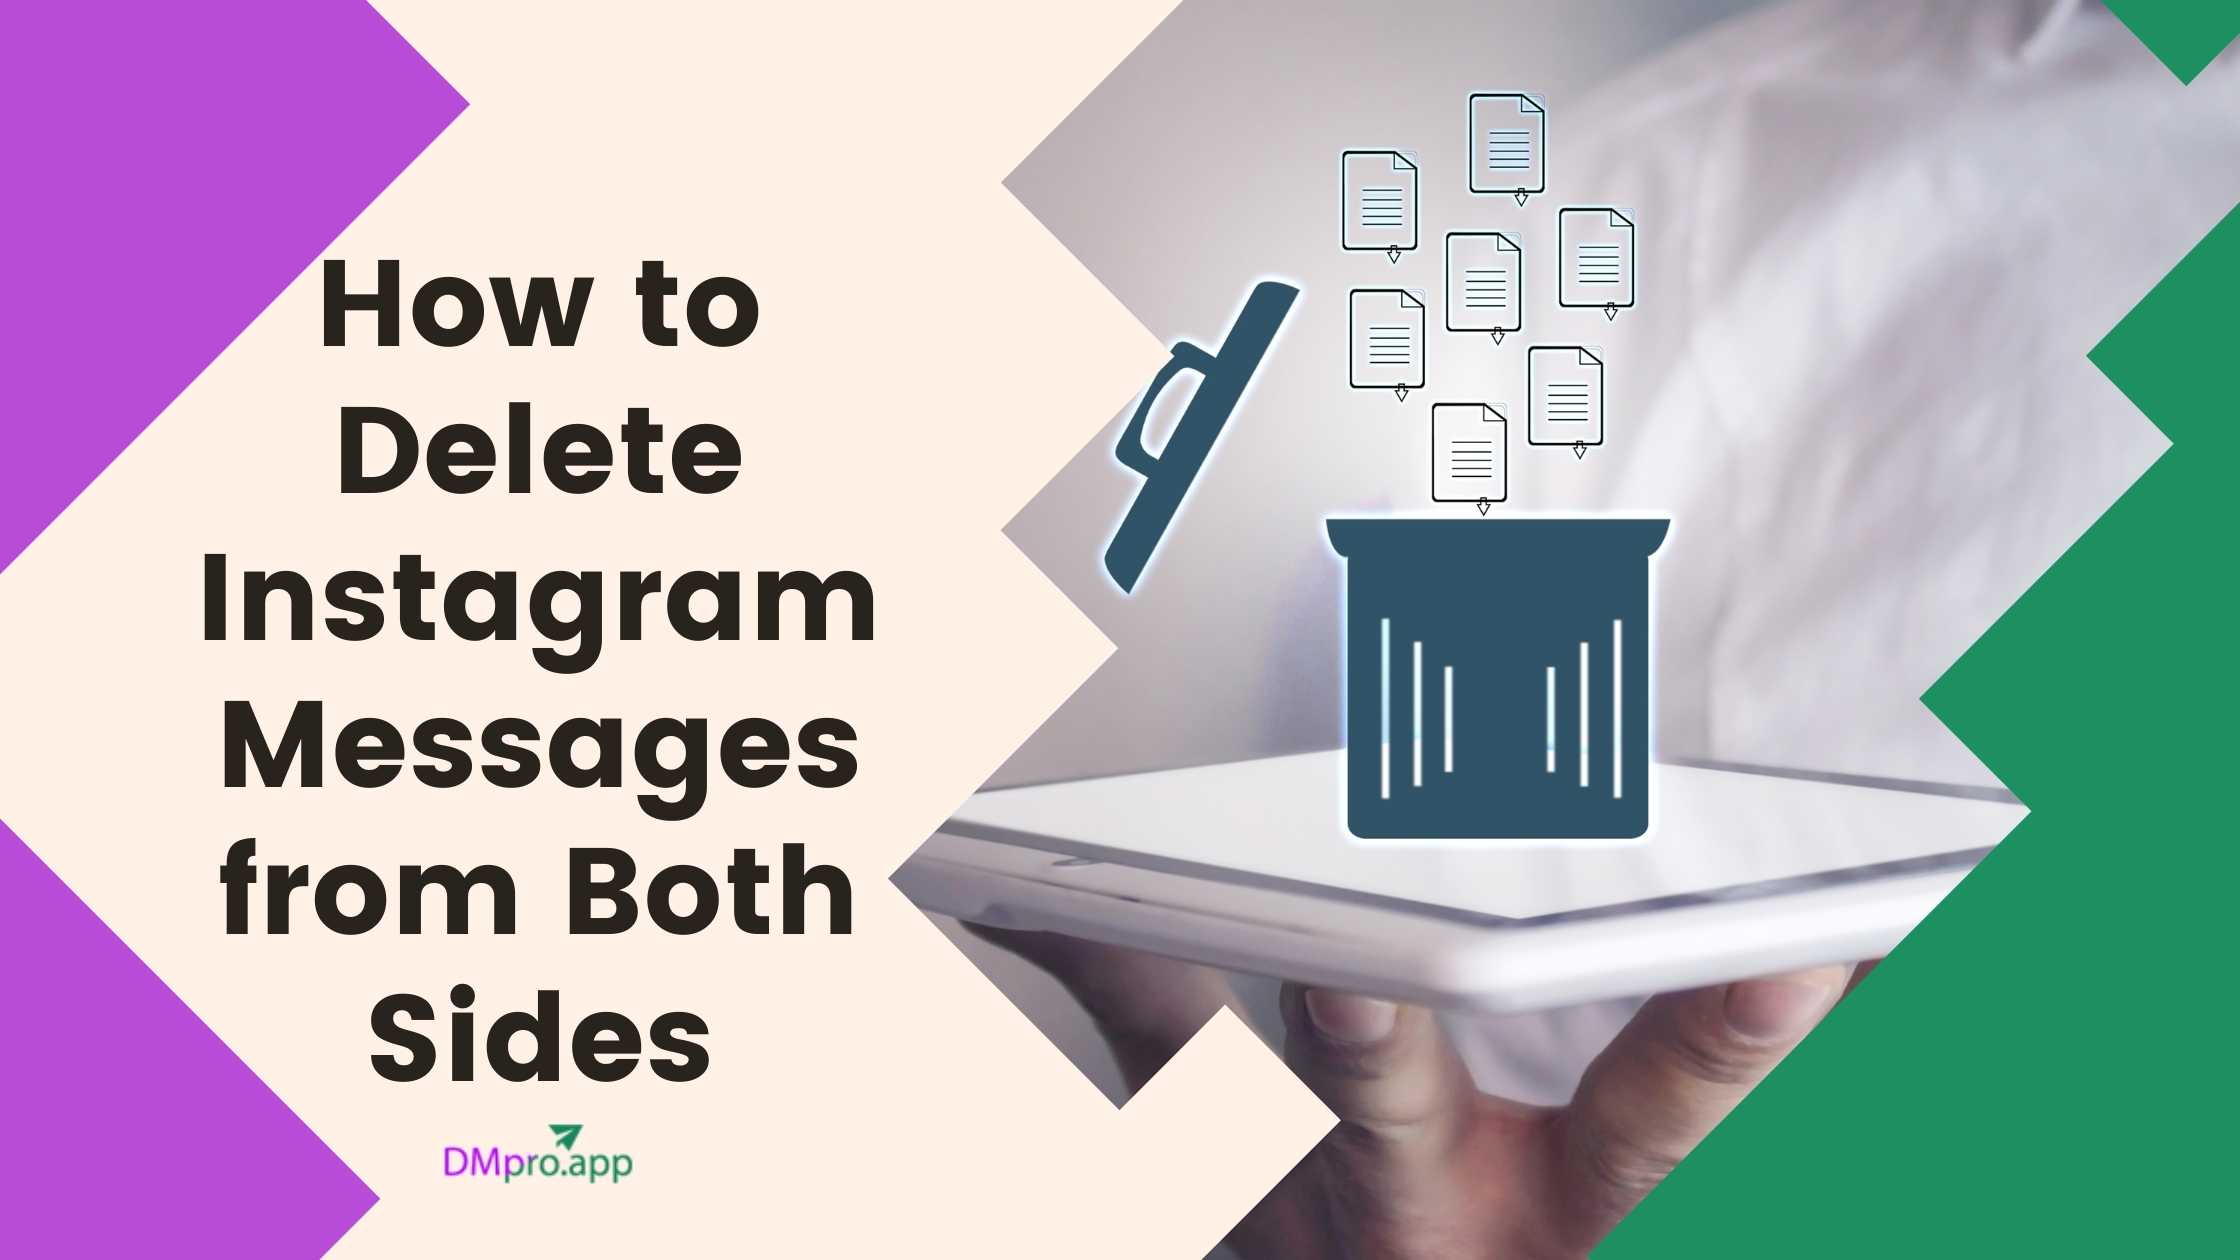 How to Delete Instagram Messages from Both Sides - DMPro